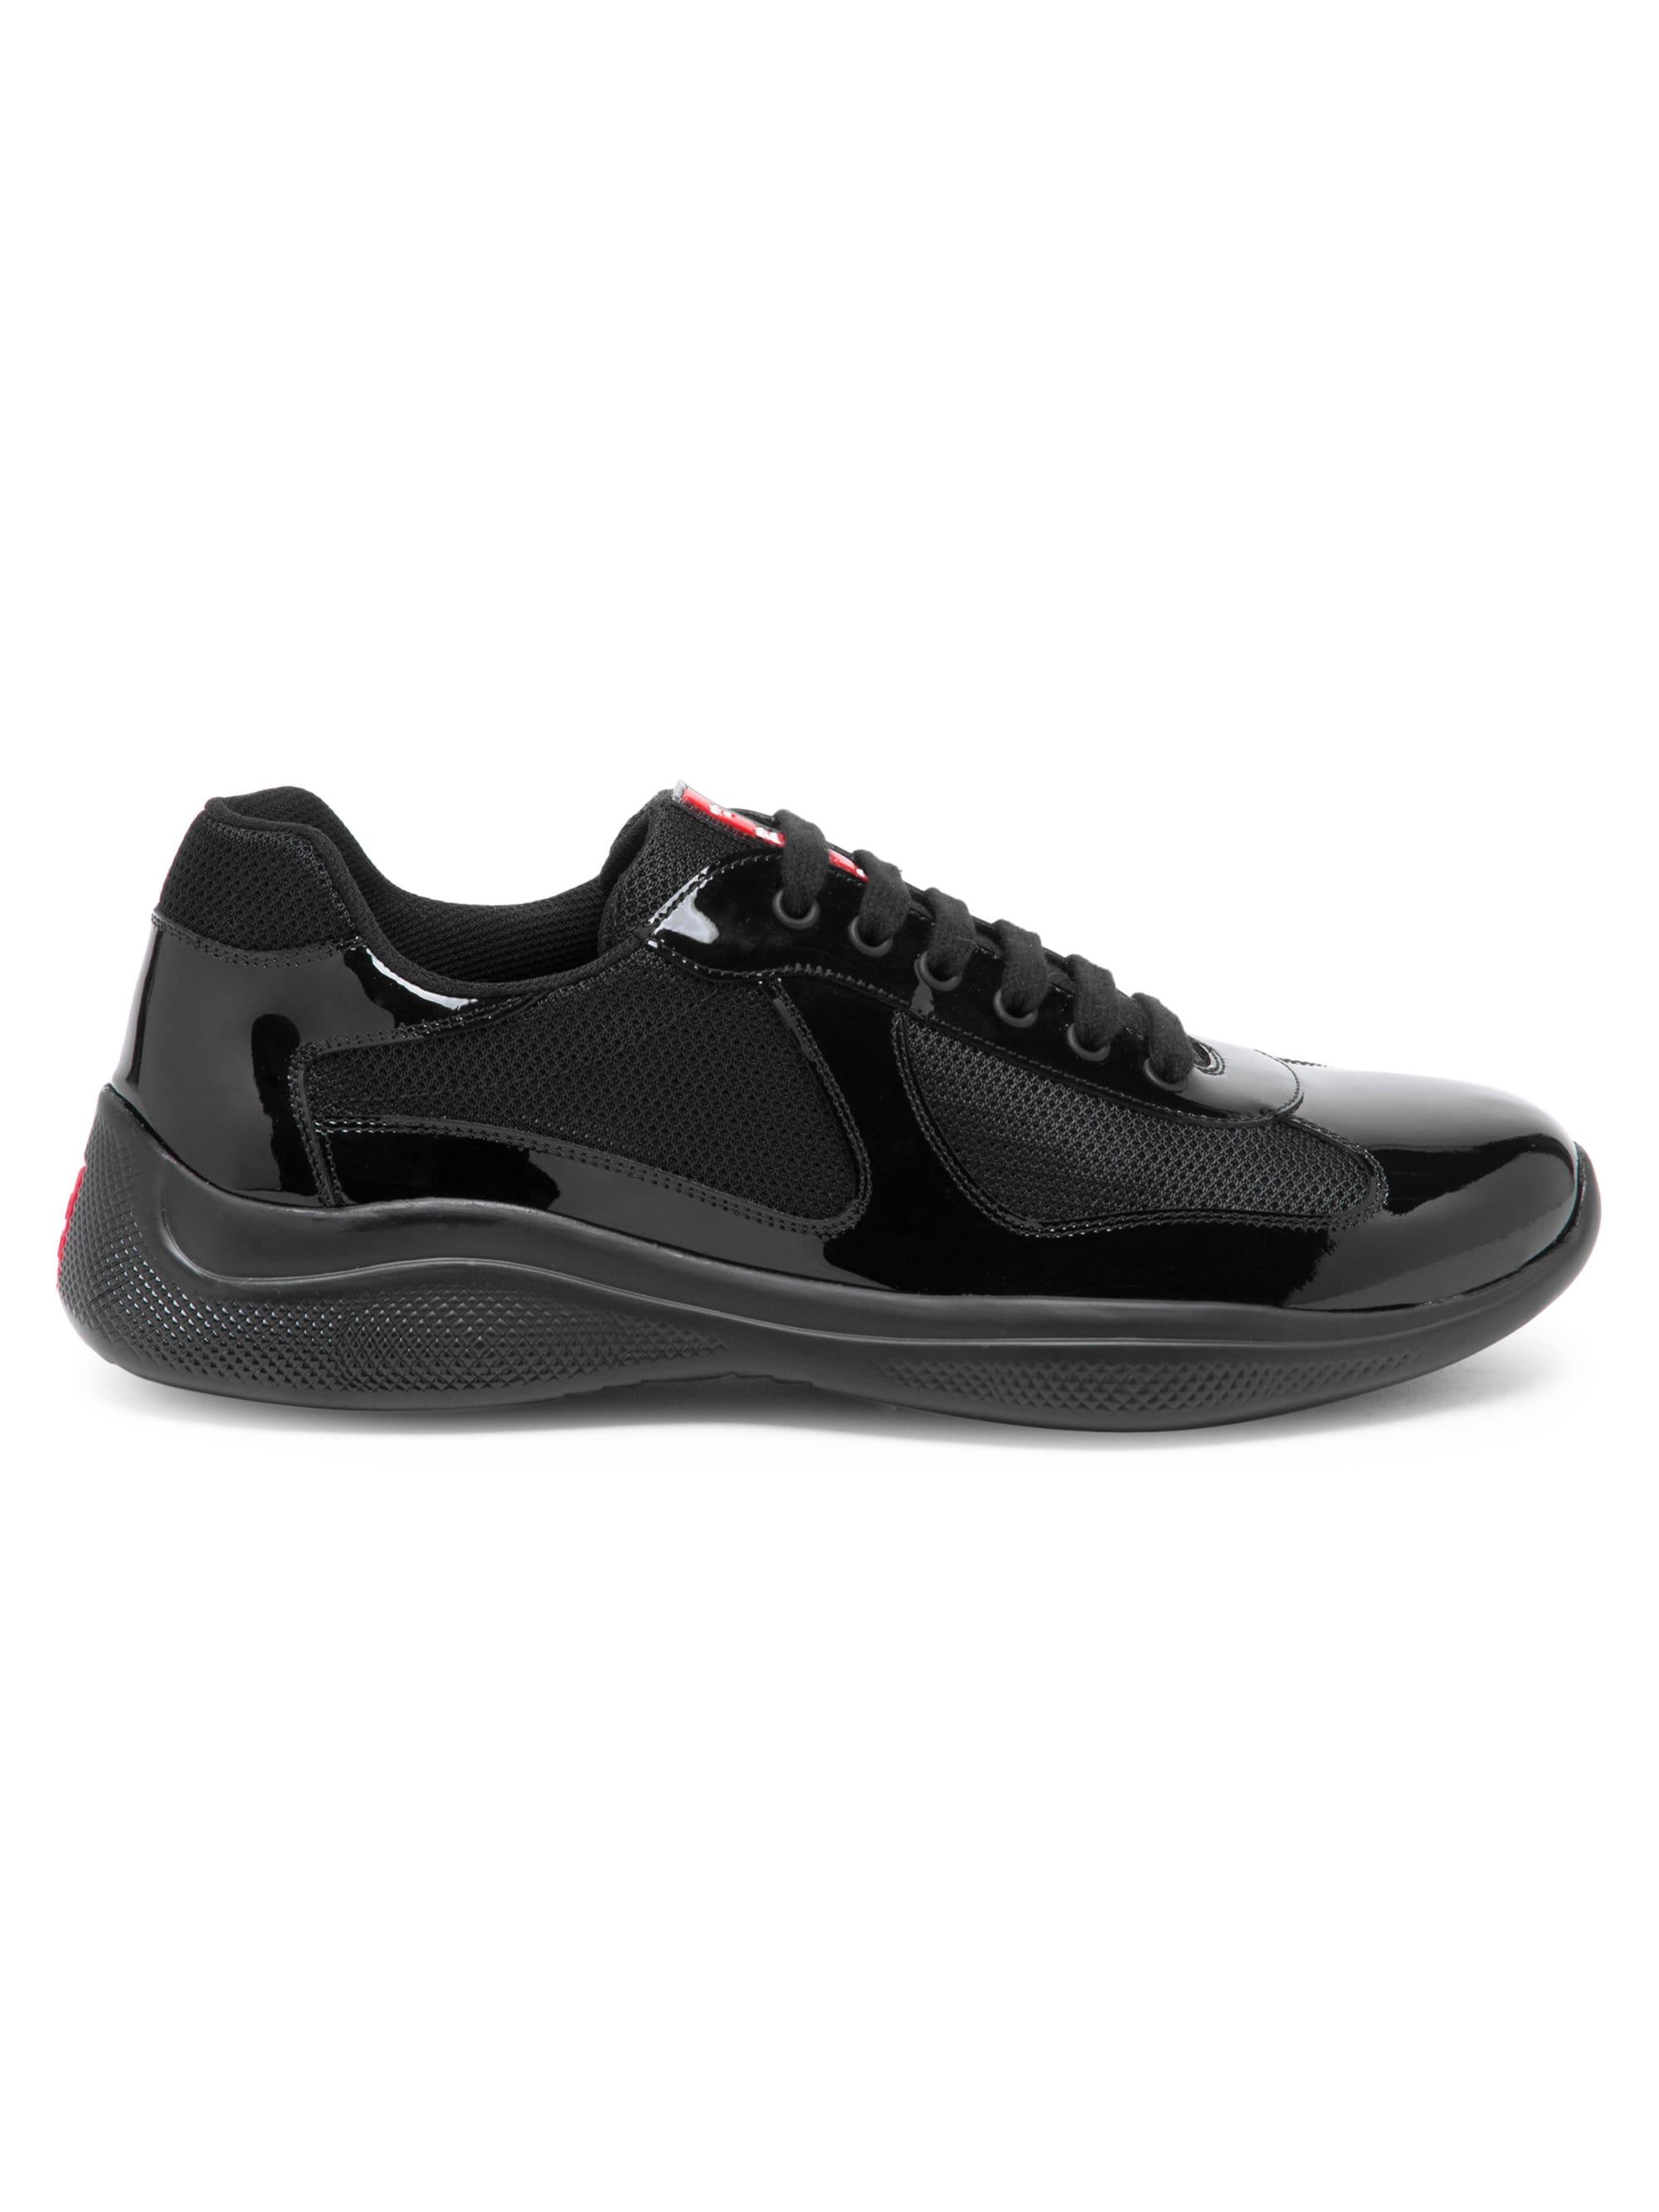 Prada America's Cup Patent Leather & Technical Fabric Sneakers in Nero ( Black) for Men | Lyst